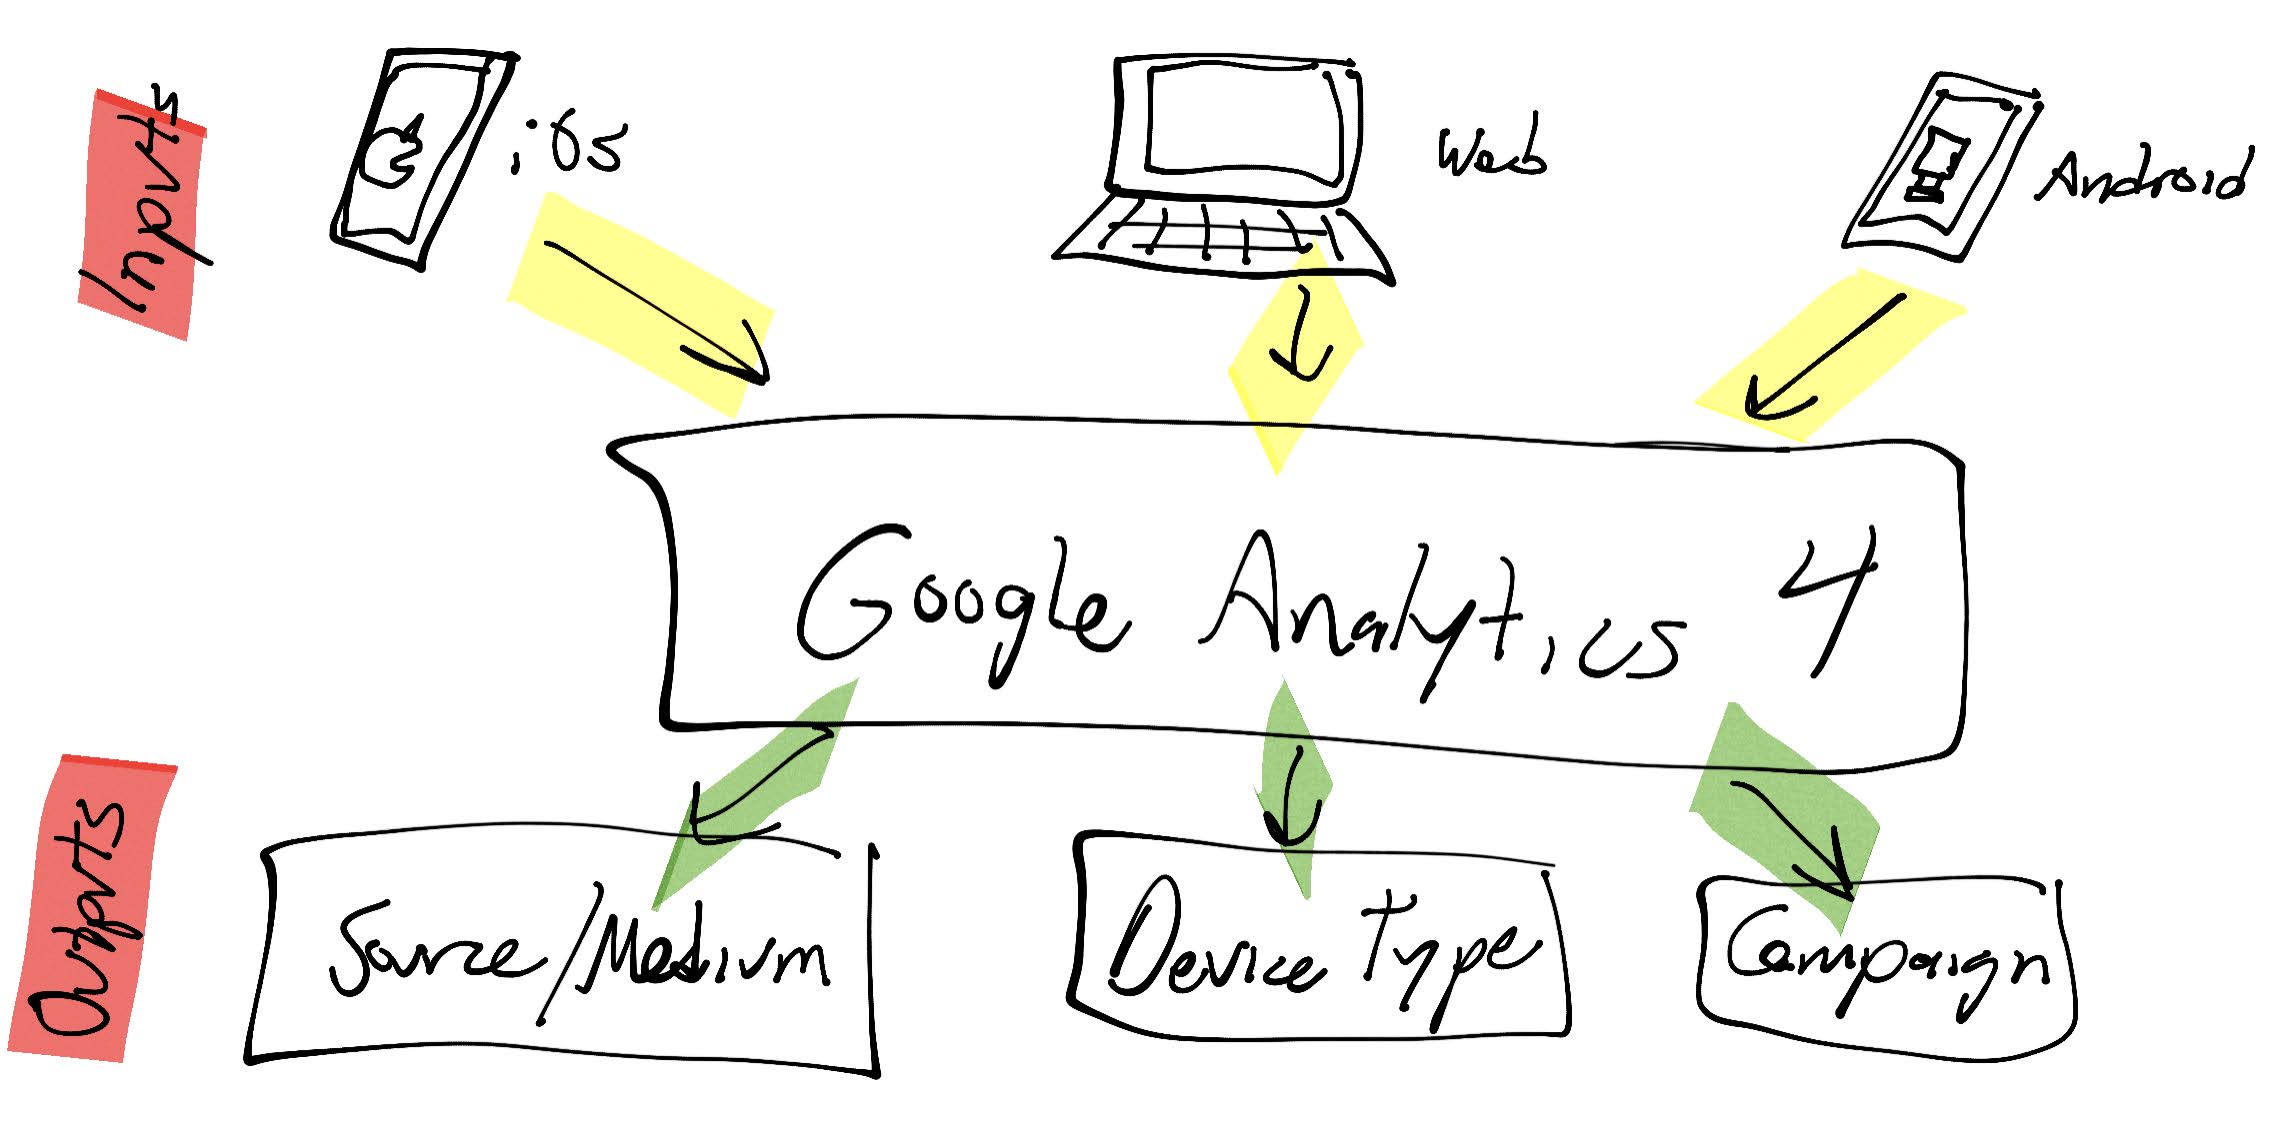 Google Analytics 4 Inputs and Outputs